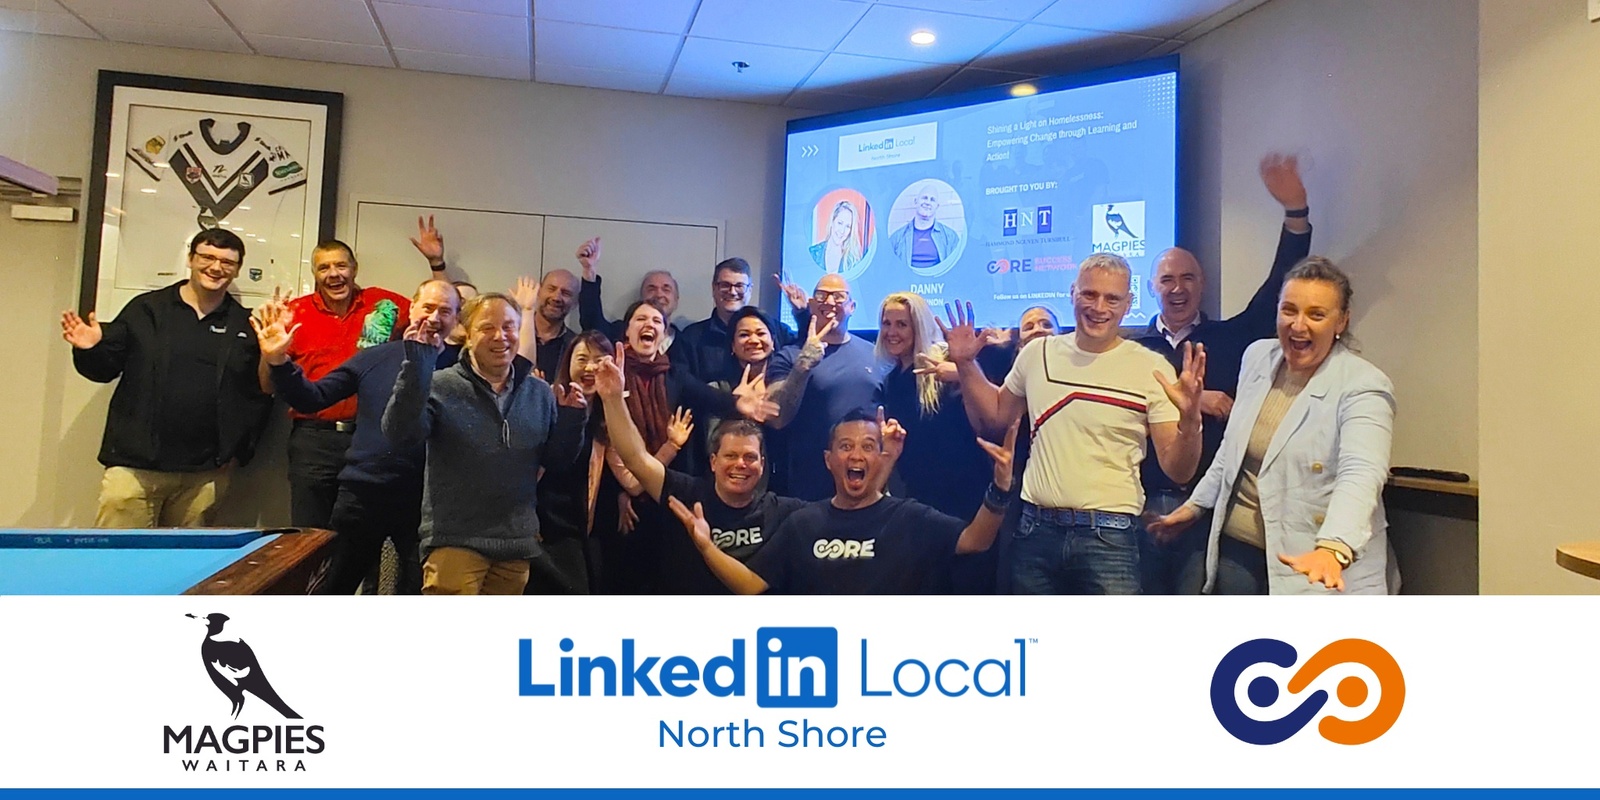 Banner image for LinkedIn Local North Shore